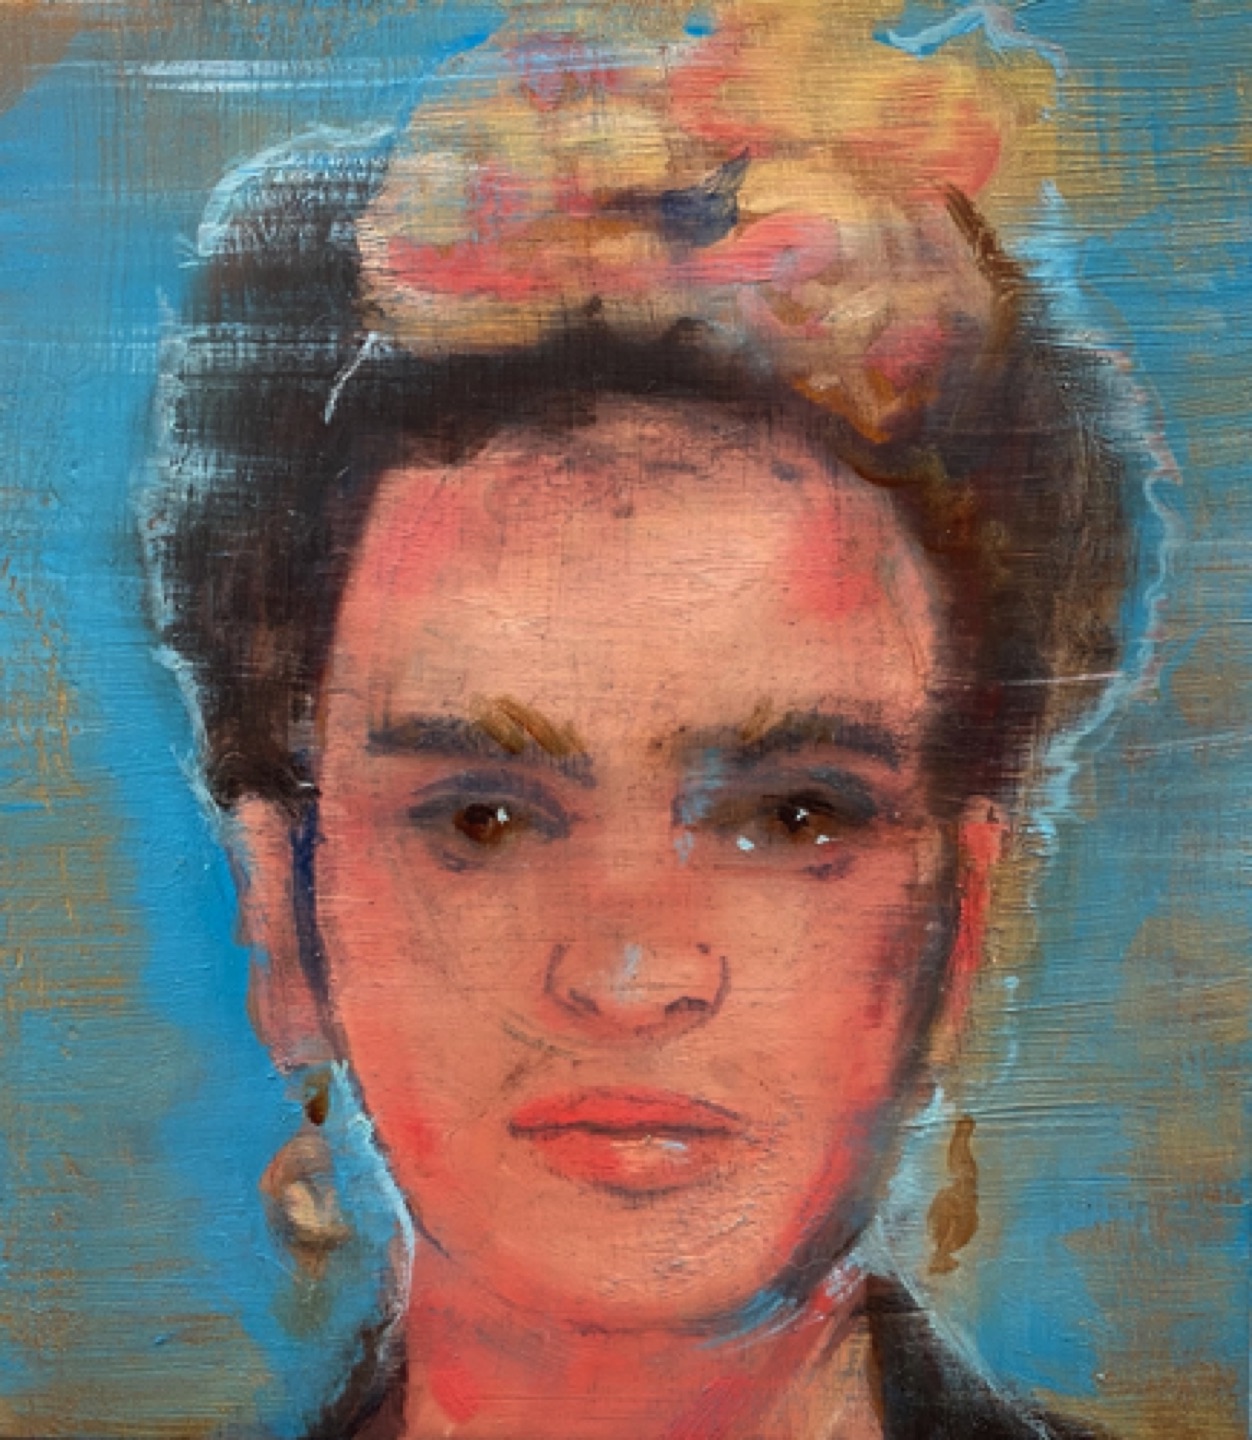 Gregg Chadwick 
Frida Kahlo
 10"x10" oil on wood cigar box 2021
Private Collection, Los Angeles
Sold at The Other Art Fair - September 2021